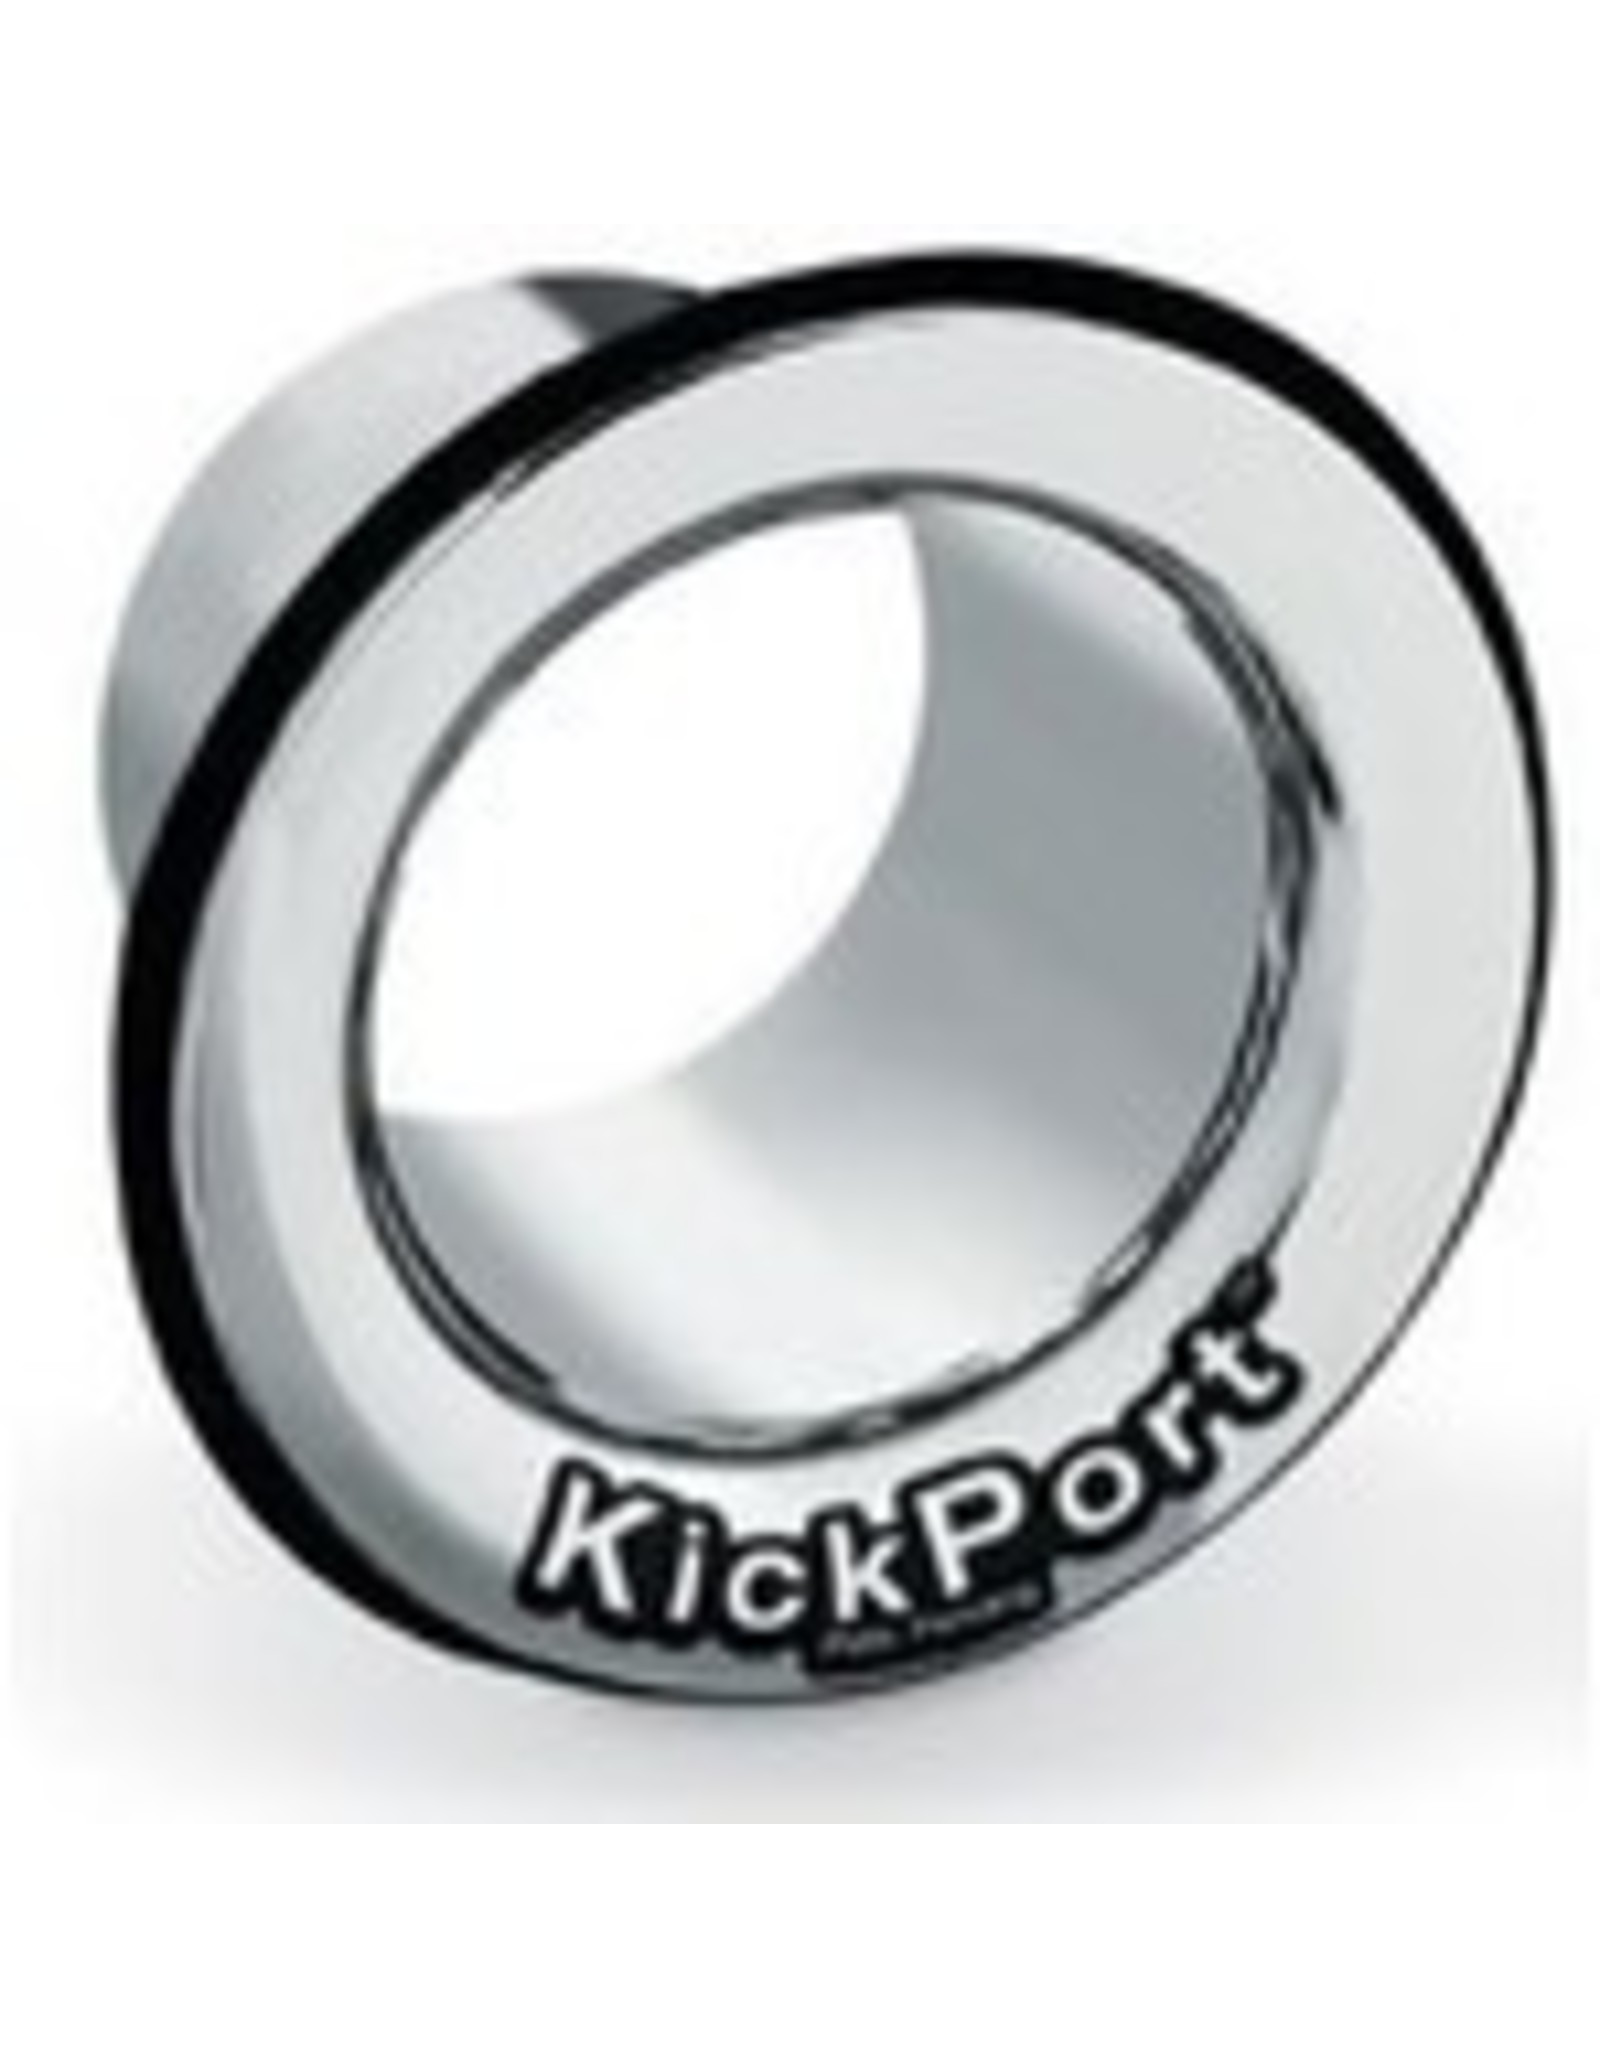 Kickport  KP2_R RED demping control bass booster